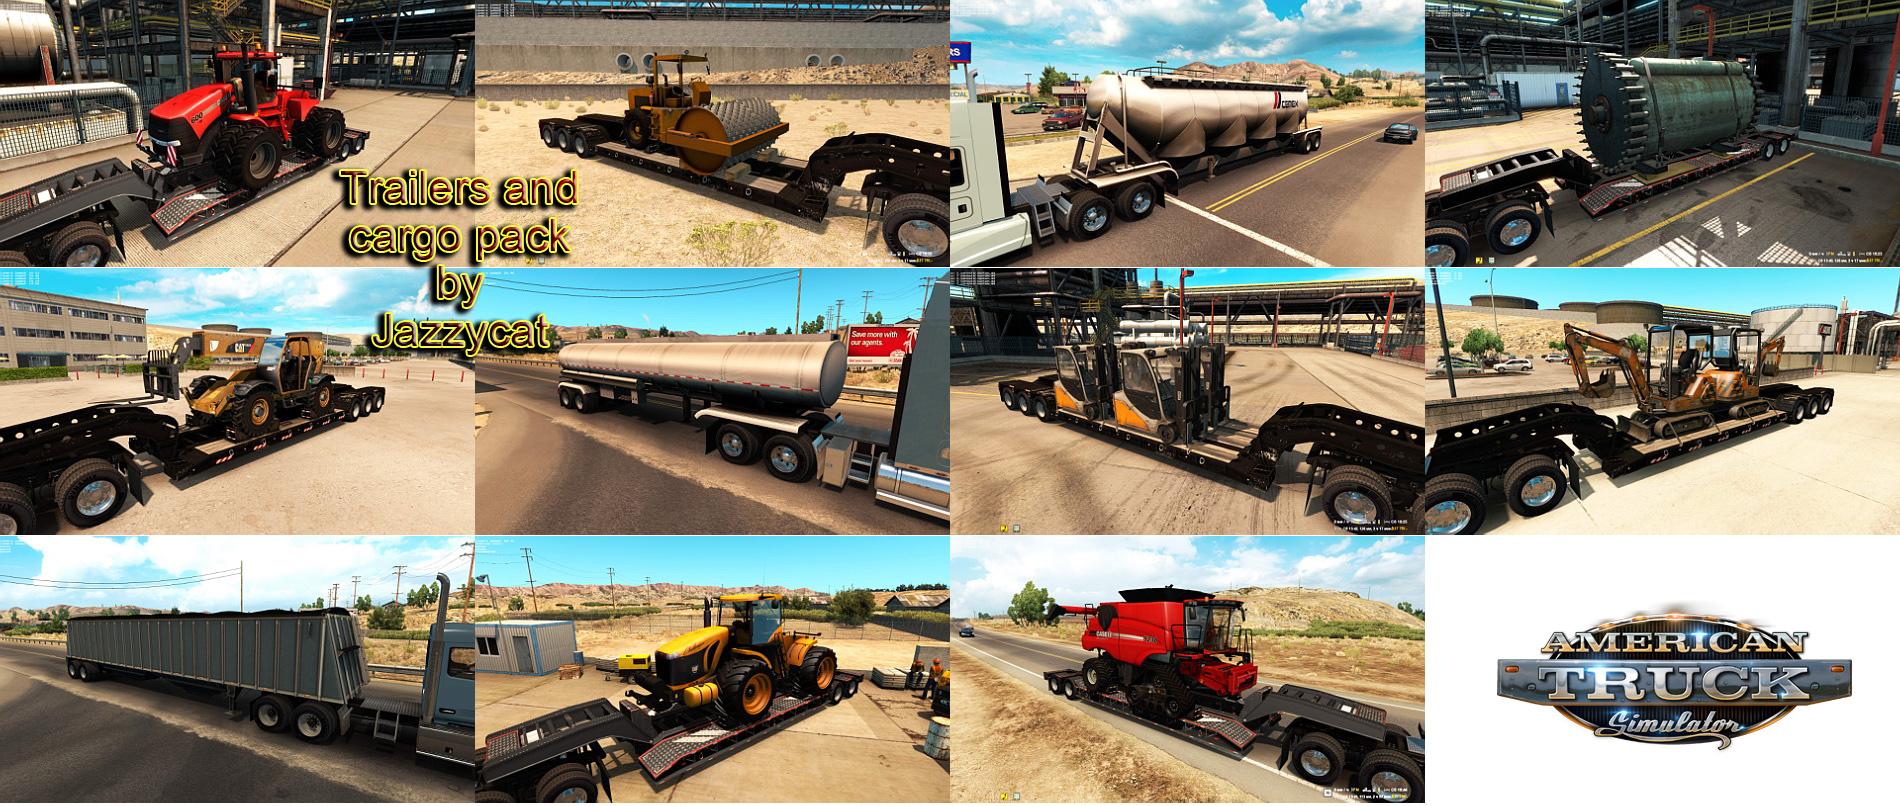 TRAILERS AND CARGO PACK BY JAZZYCAT V1.0 ATS